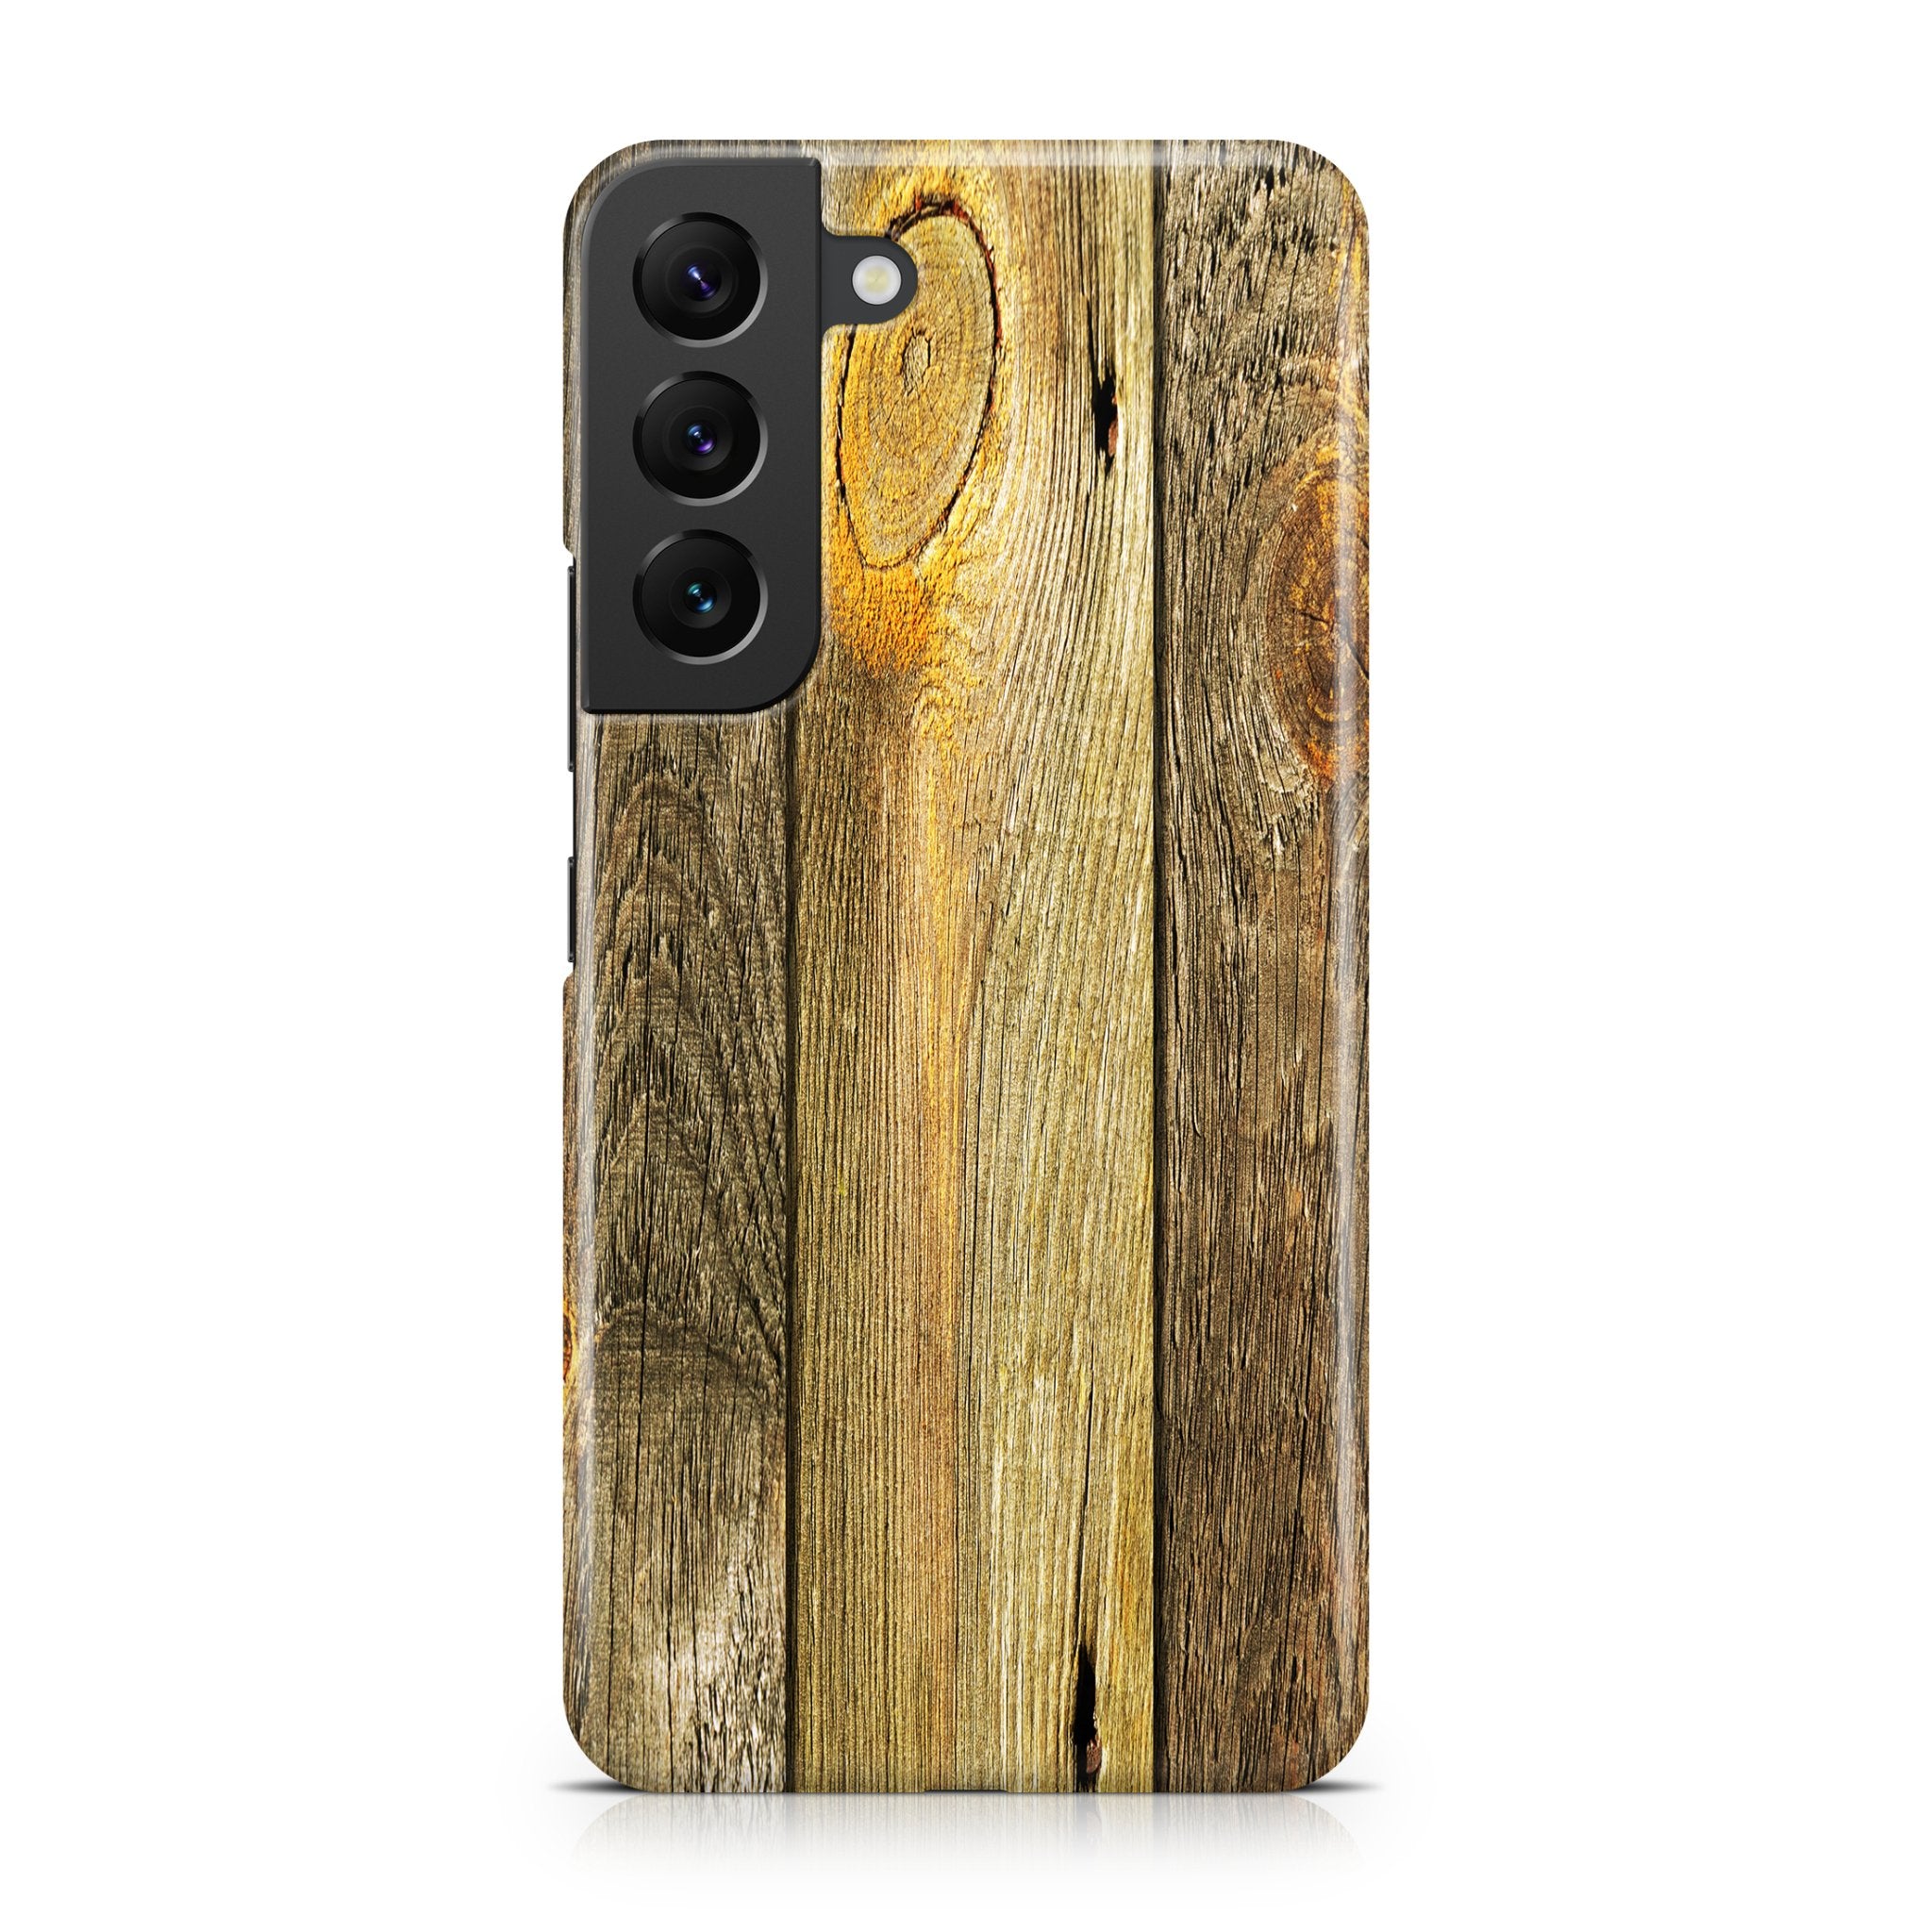 Distressed Wood - Samsung phone case designs by CaseSwagger